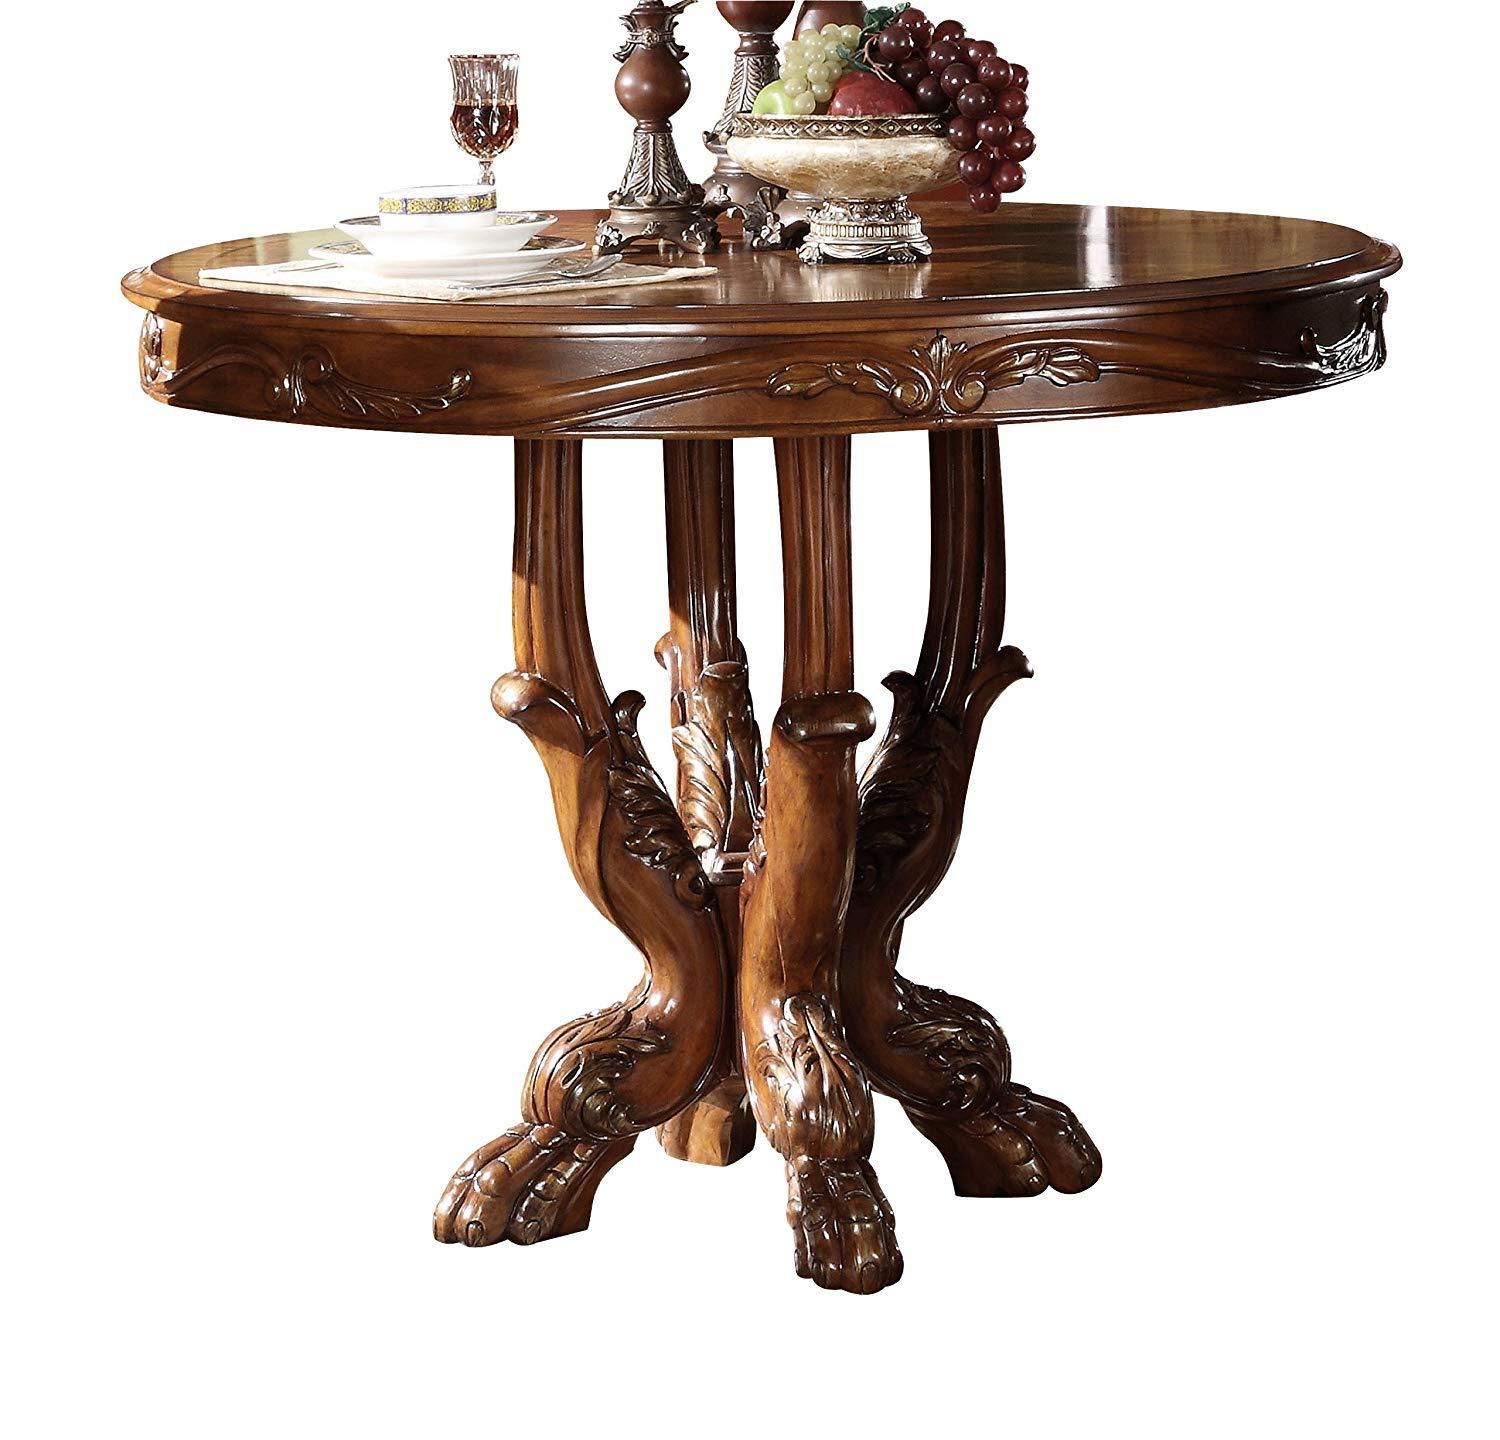 Traditional Counter Height Table Dresden 12160 12160 Dresden in Cherry, Dark Brown Lacquer